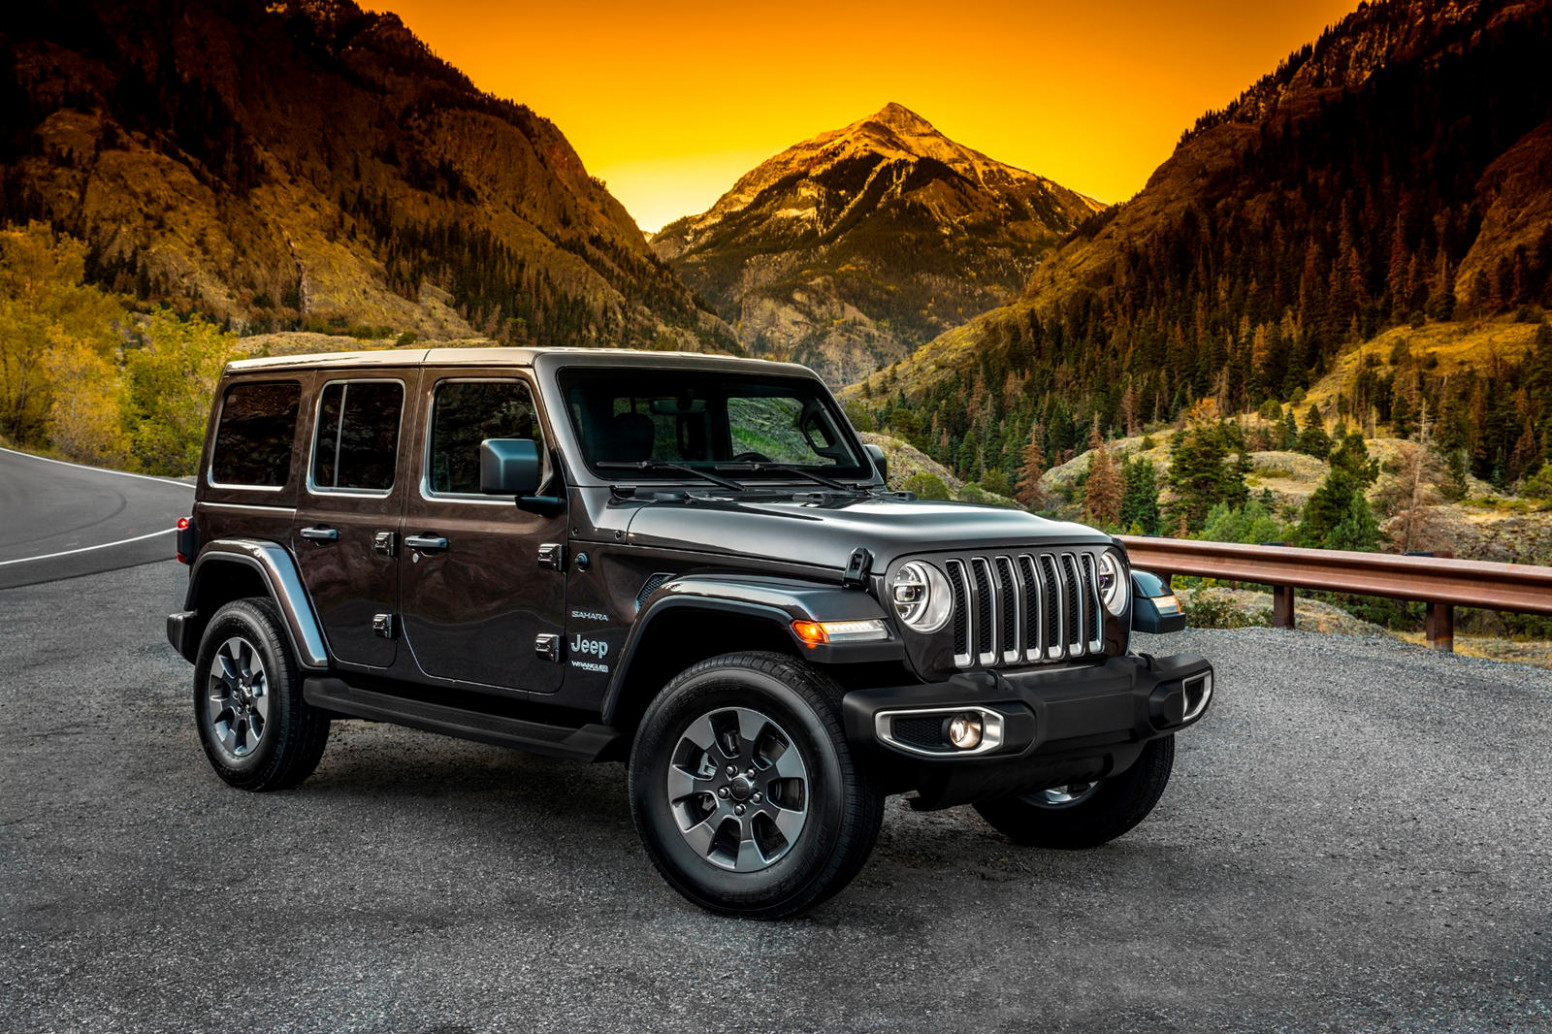 Redesign and Review Jeep Rubicon 2022